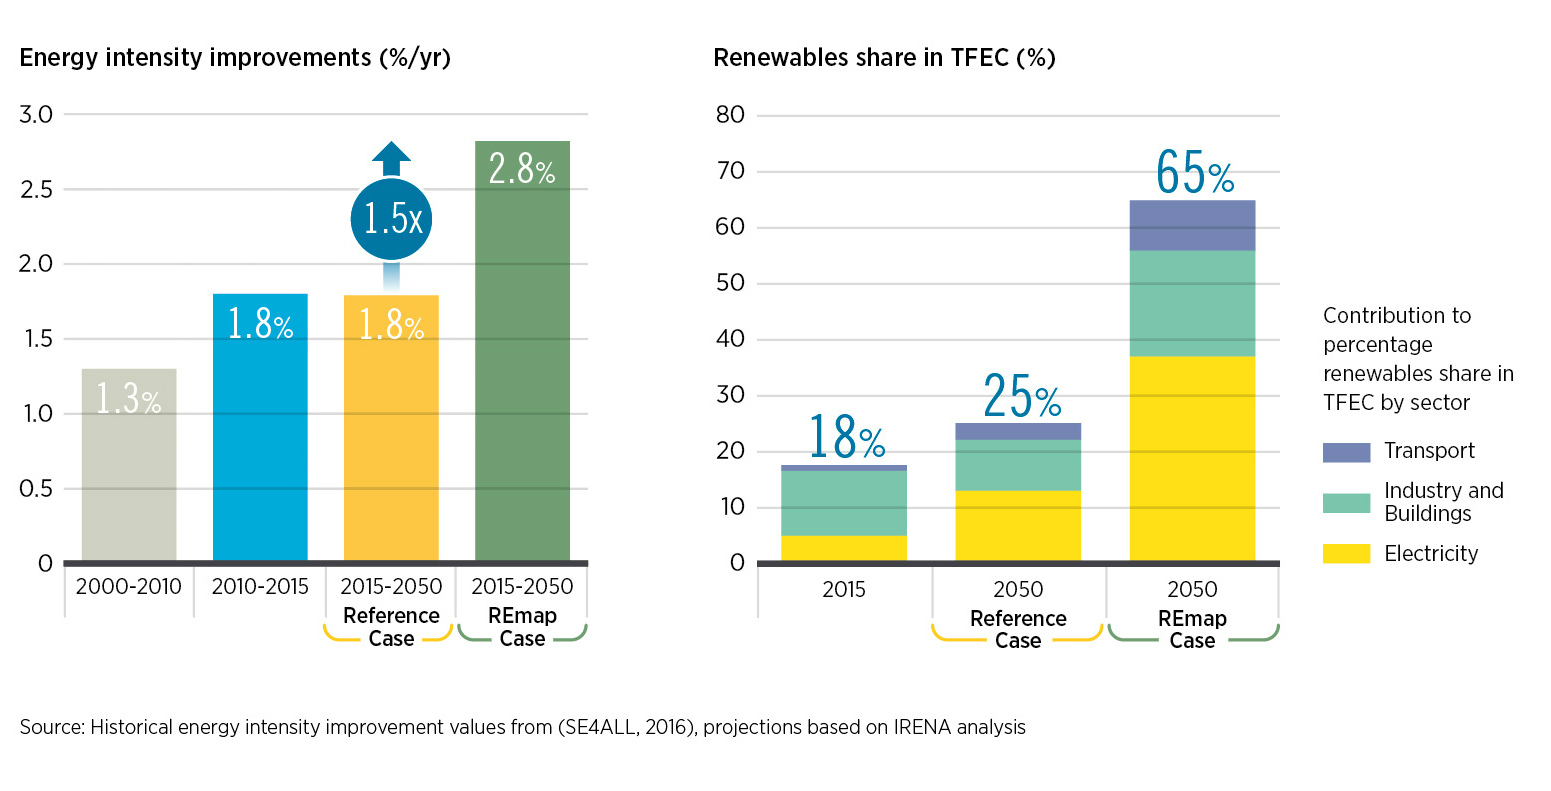 Renewables could make up two-thirds of the energy mix by 2050, with significantly improved energy intensity.